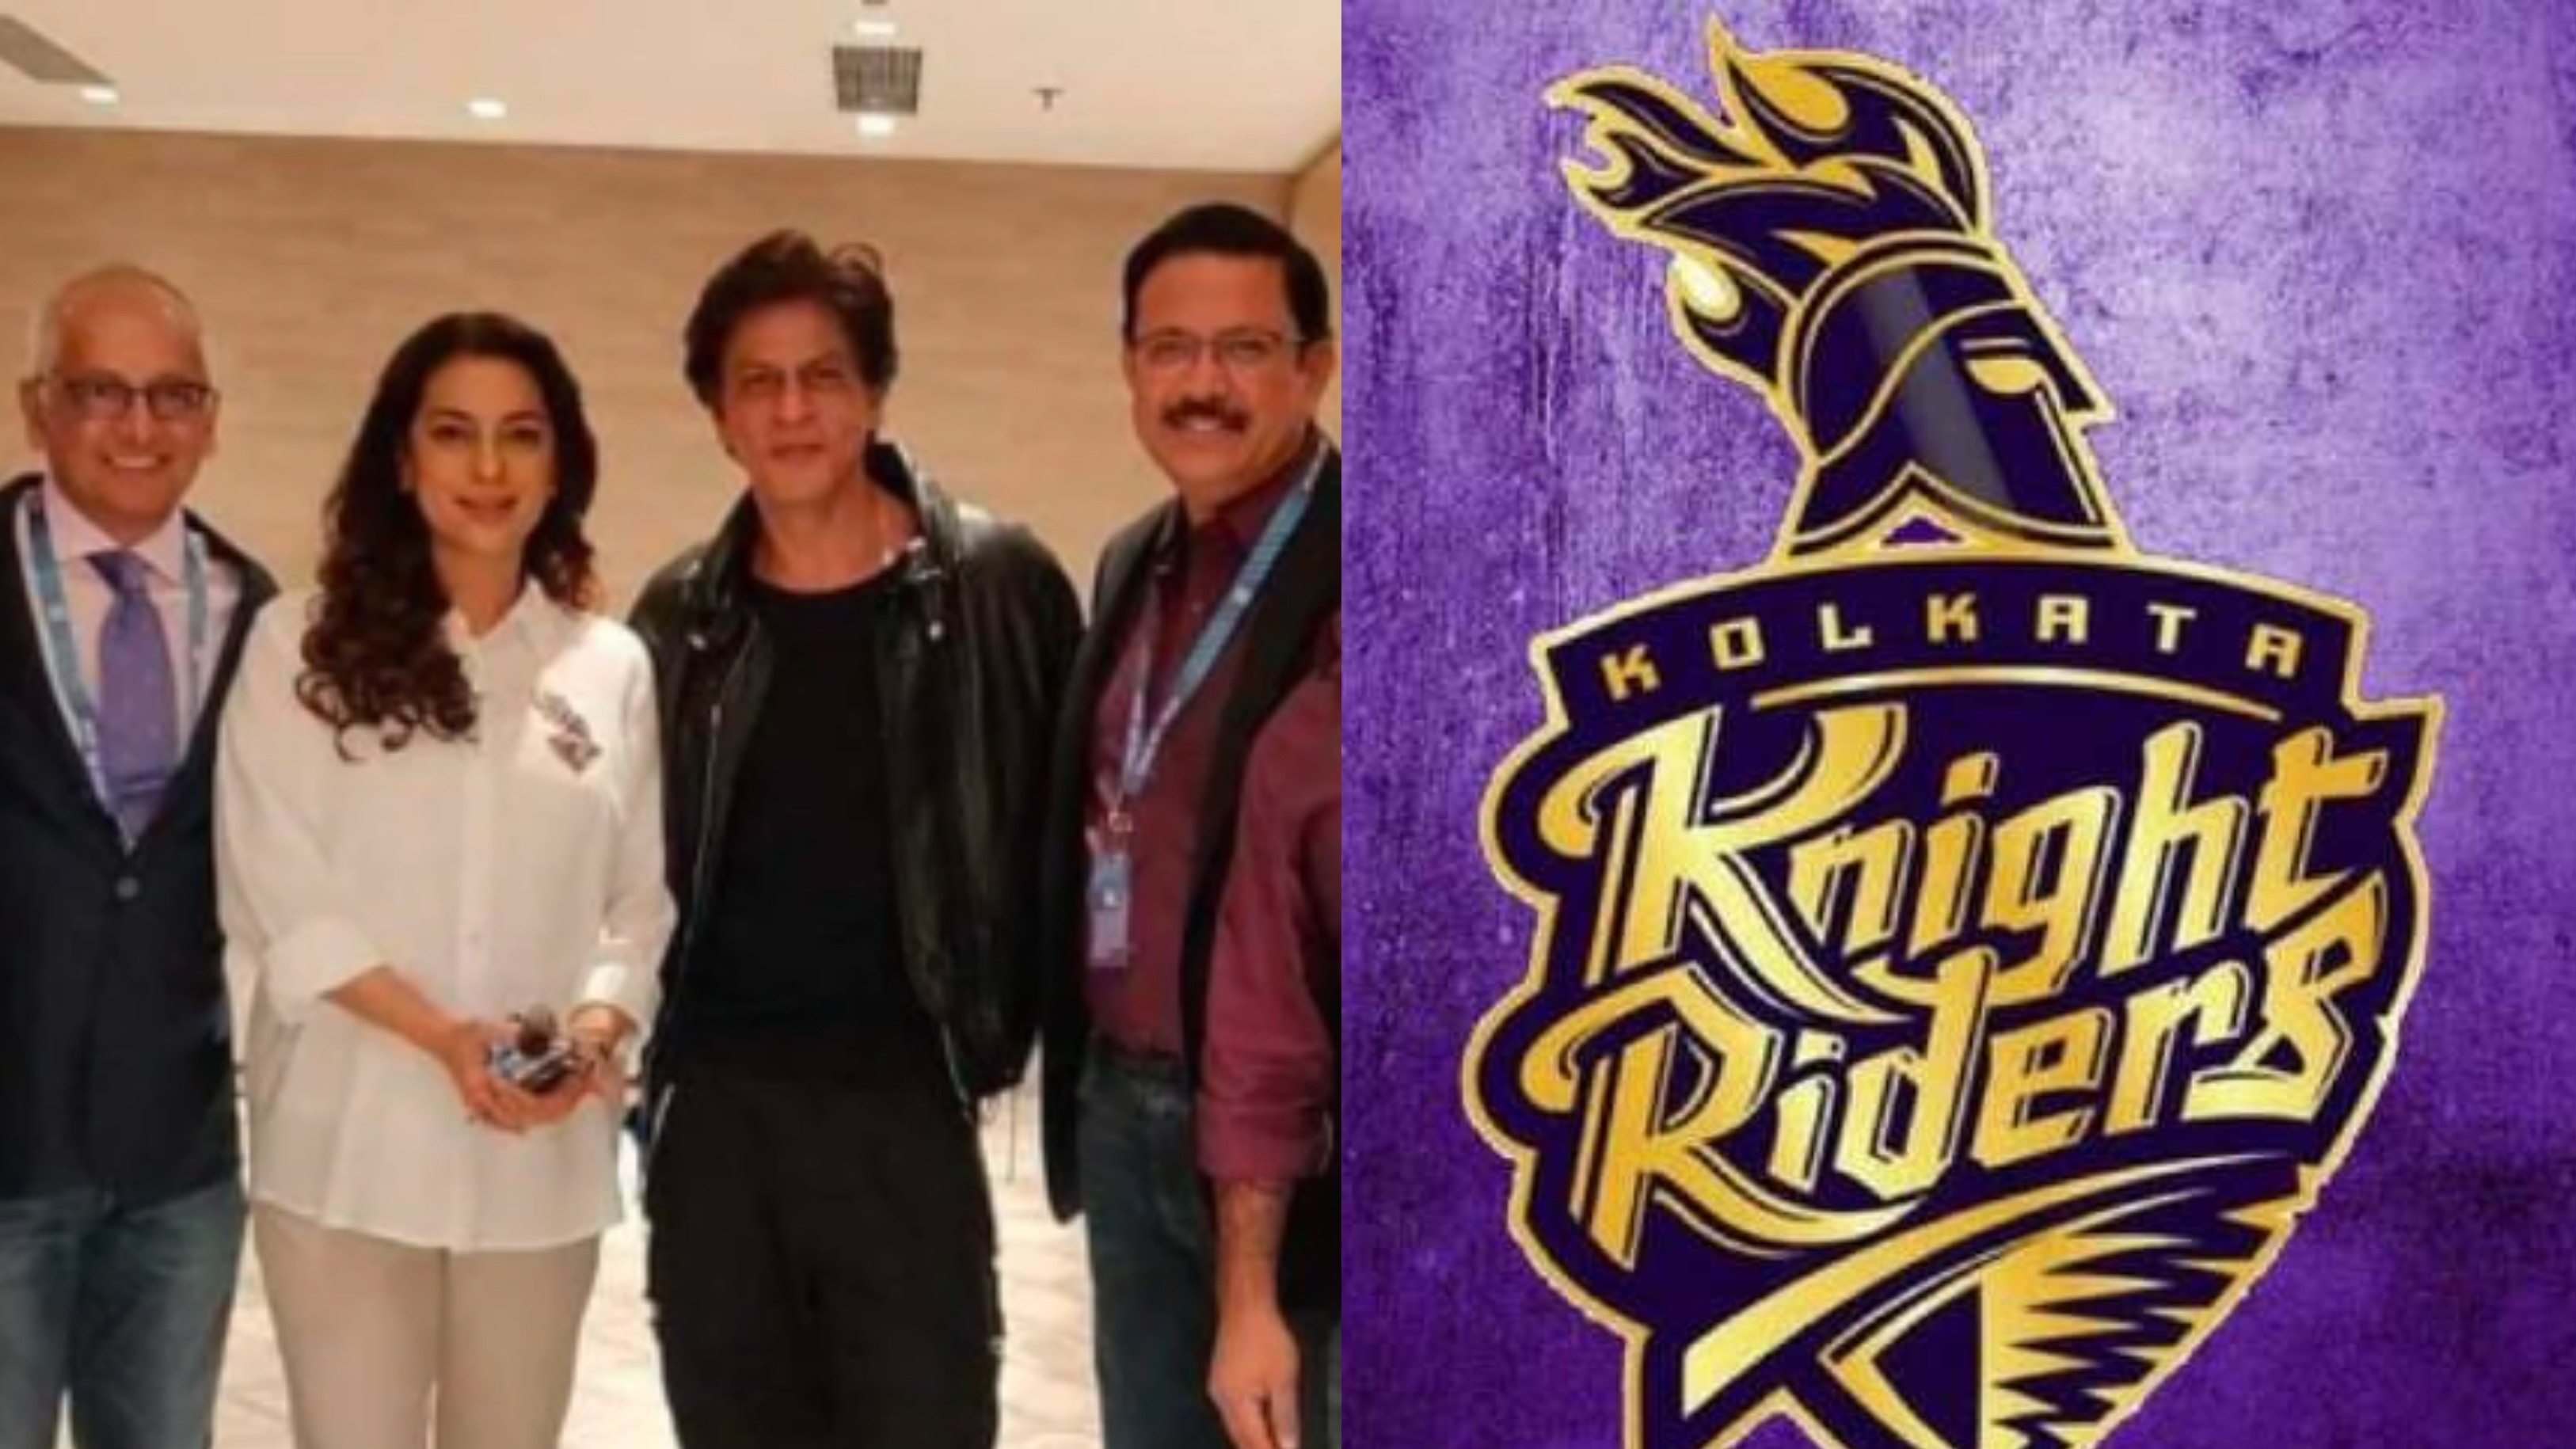 Kolkata Knight Riders extend support to West Bengal in aftermath of Amphan cyclone